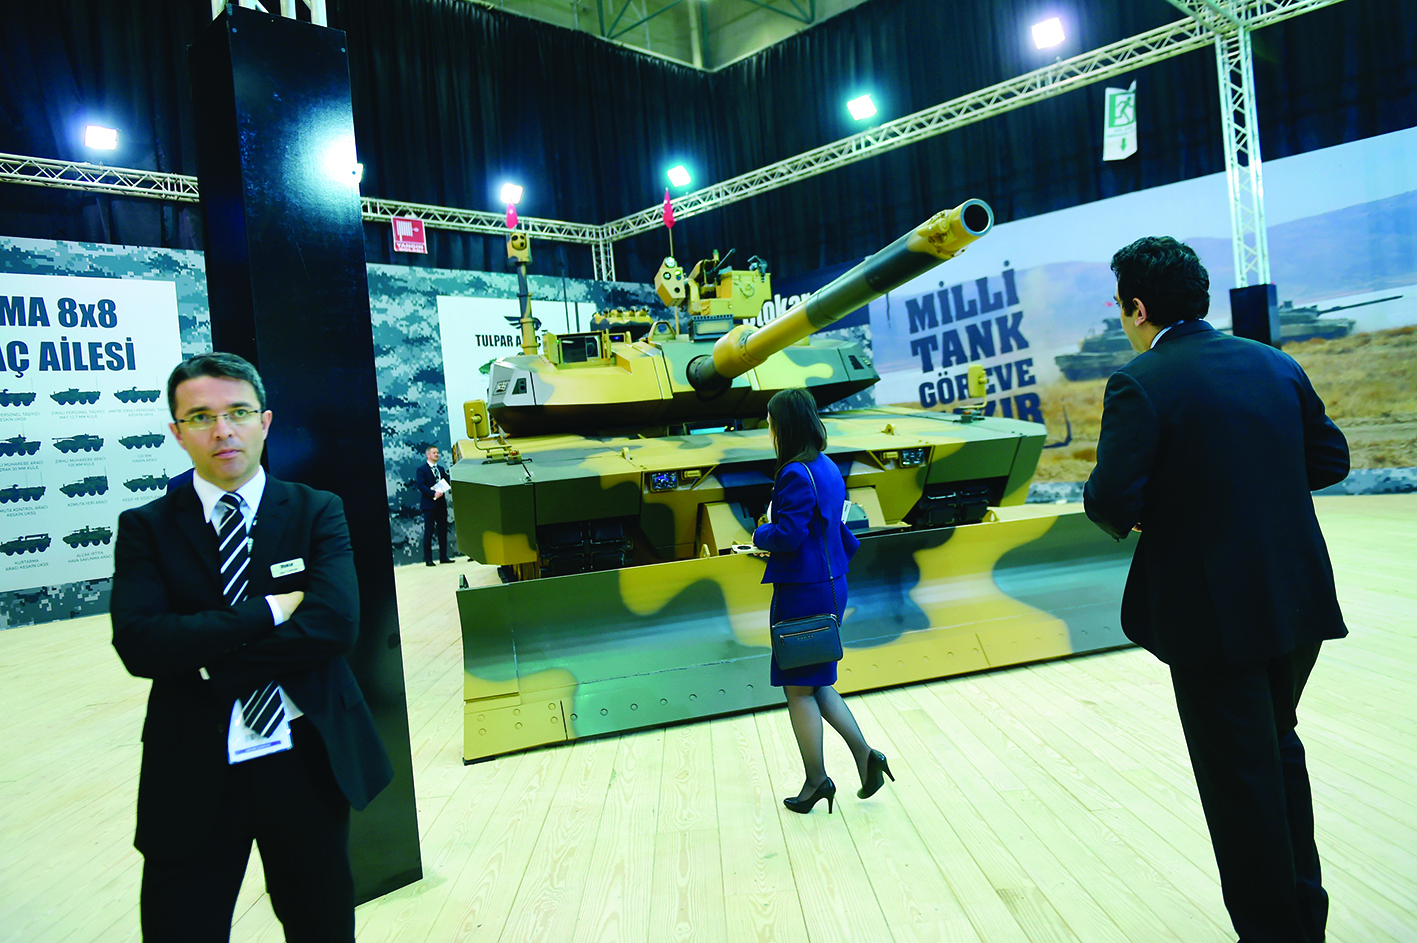 ISTANBUL: This file photo shows a woman looking at an armed military vehicle during the opening day of the 13th International Defense Industry Fair (IDEF) in Istanbul. - AFPn